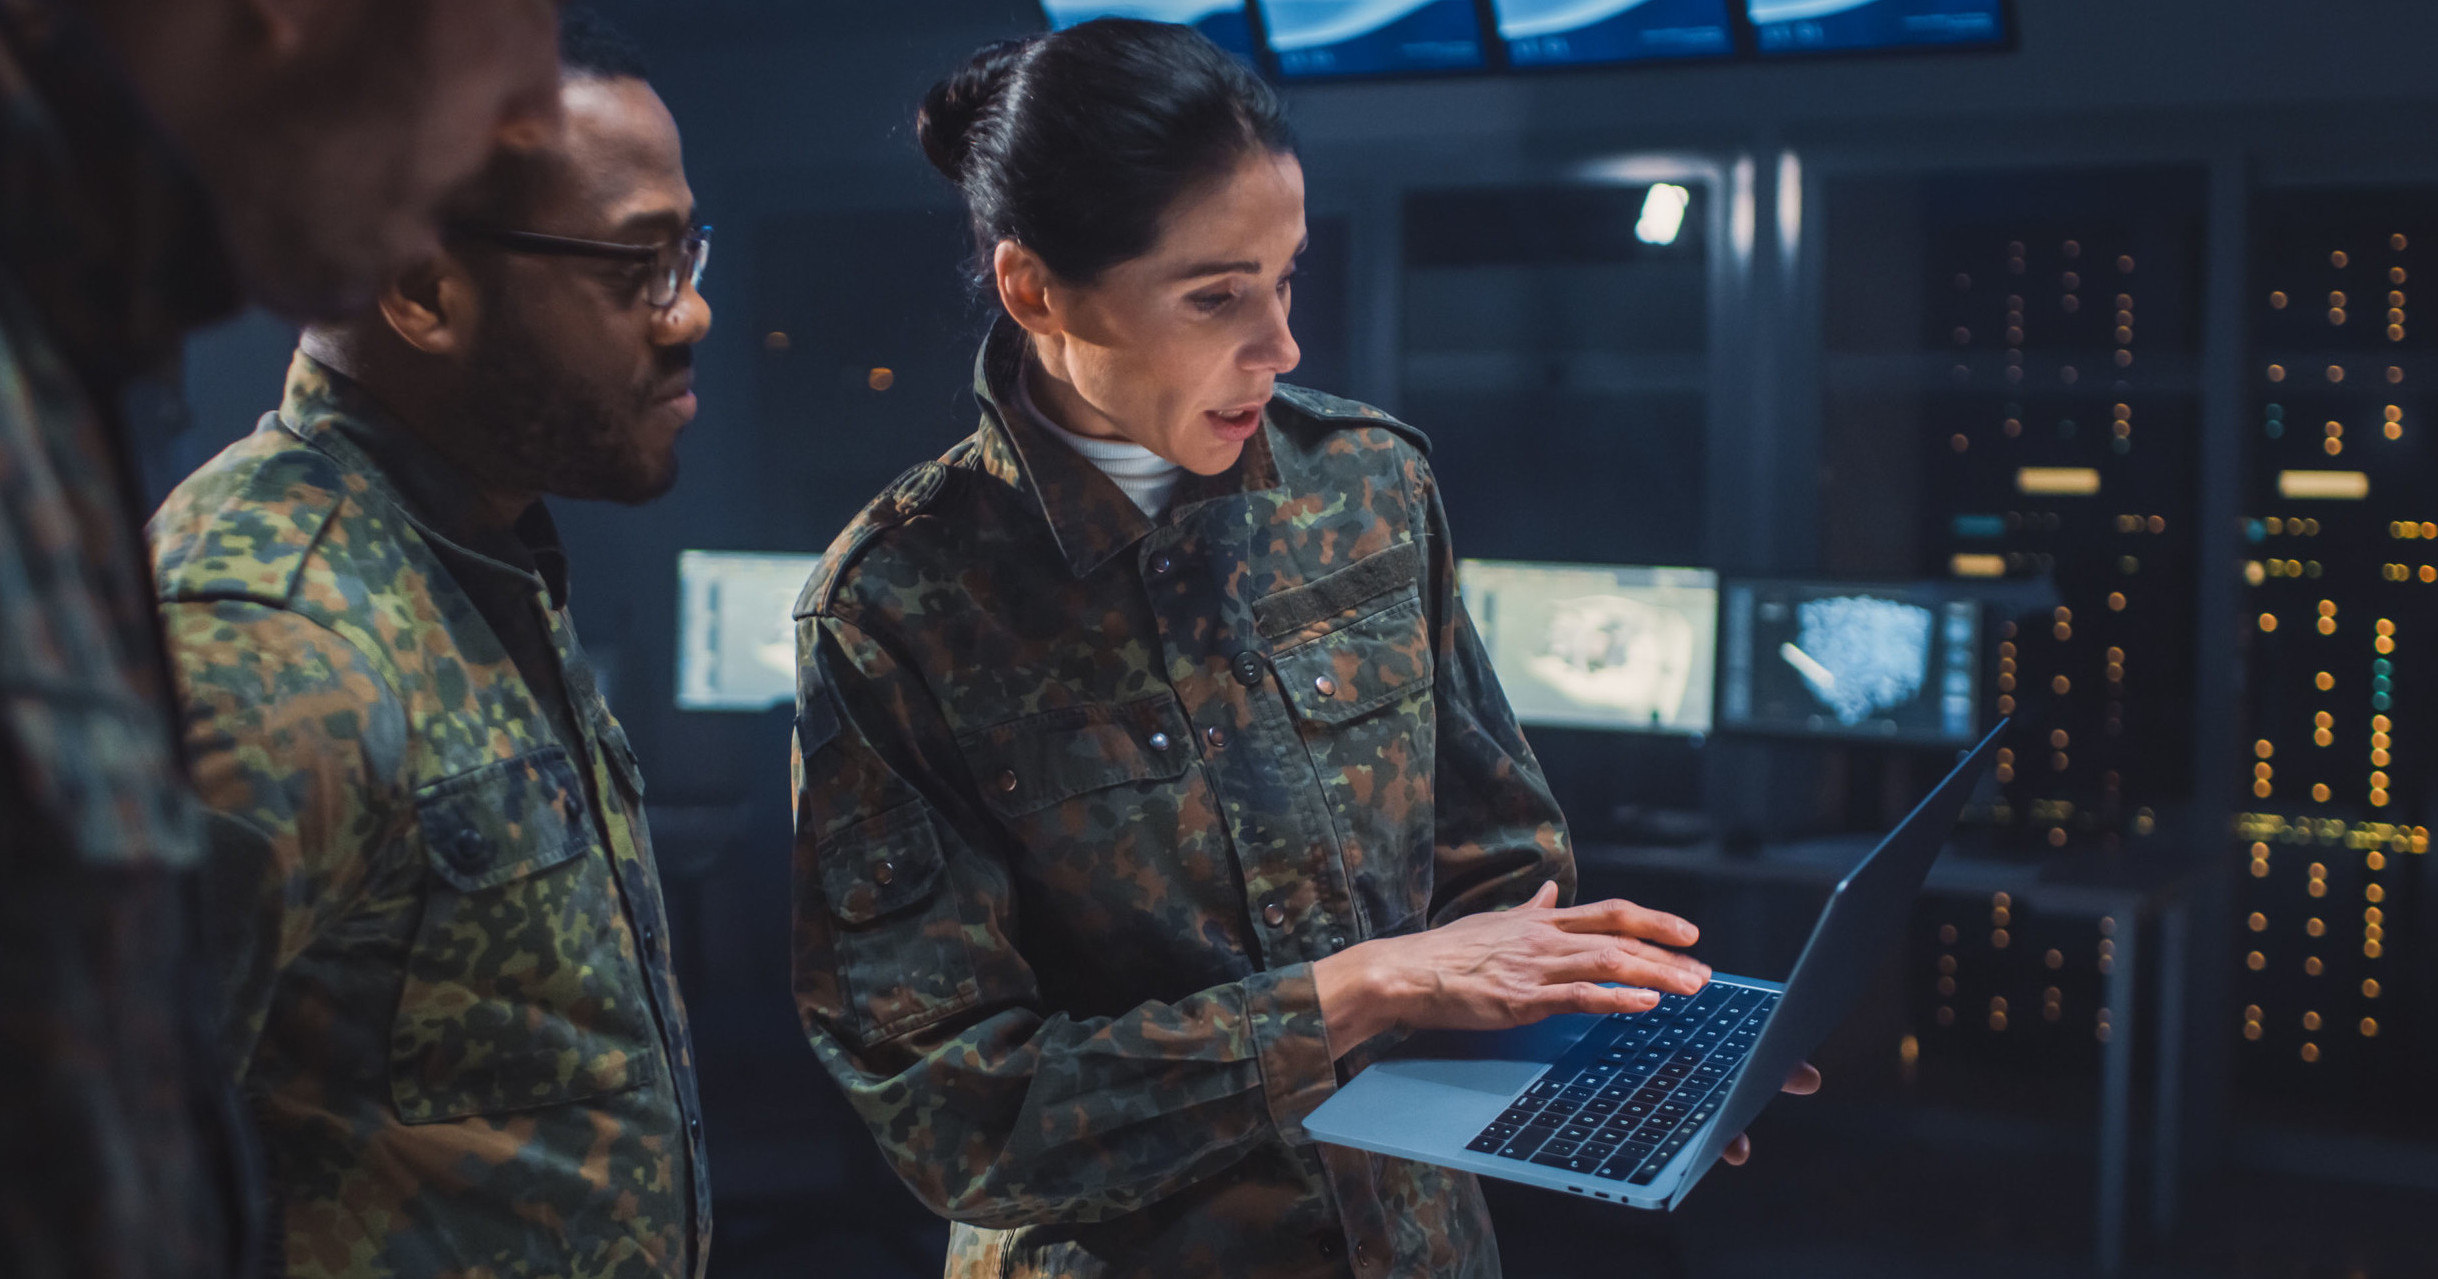 Cyber resilience demonstrated by female military officer to two male officers